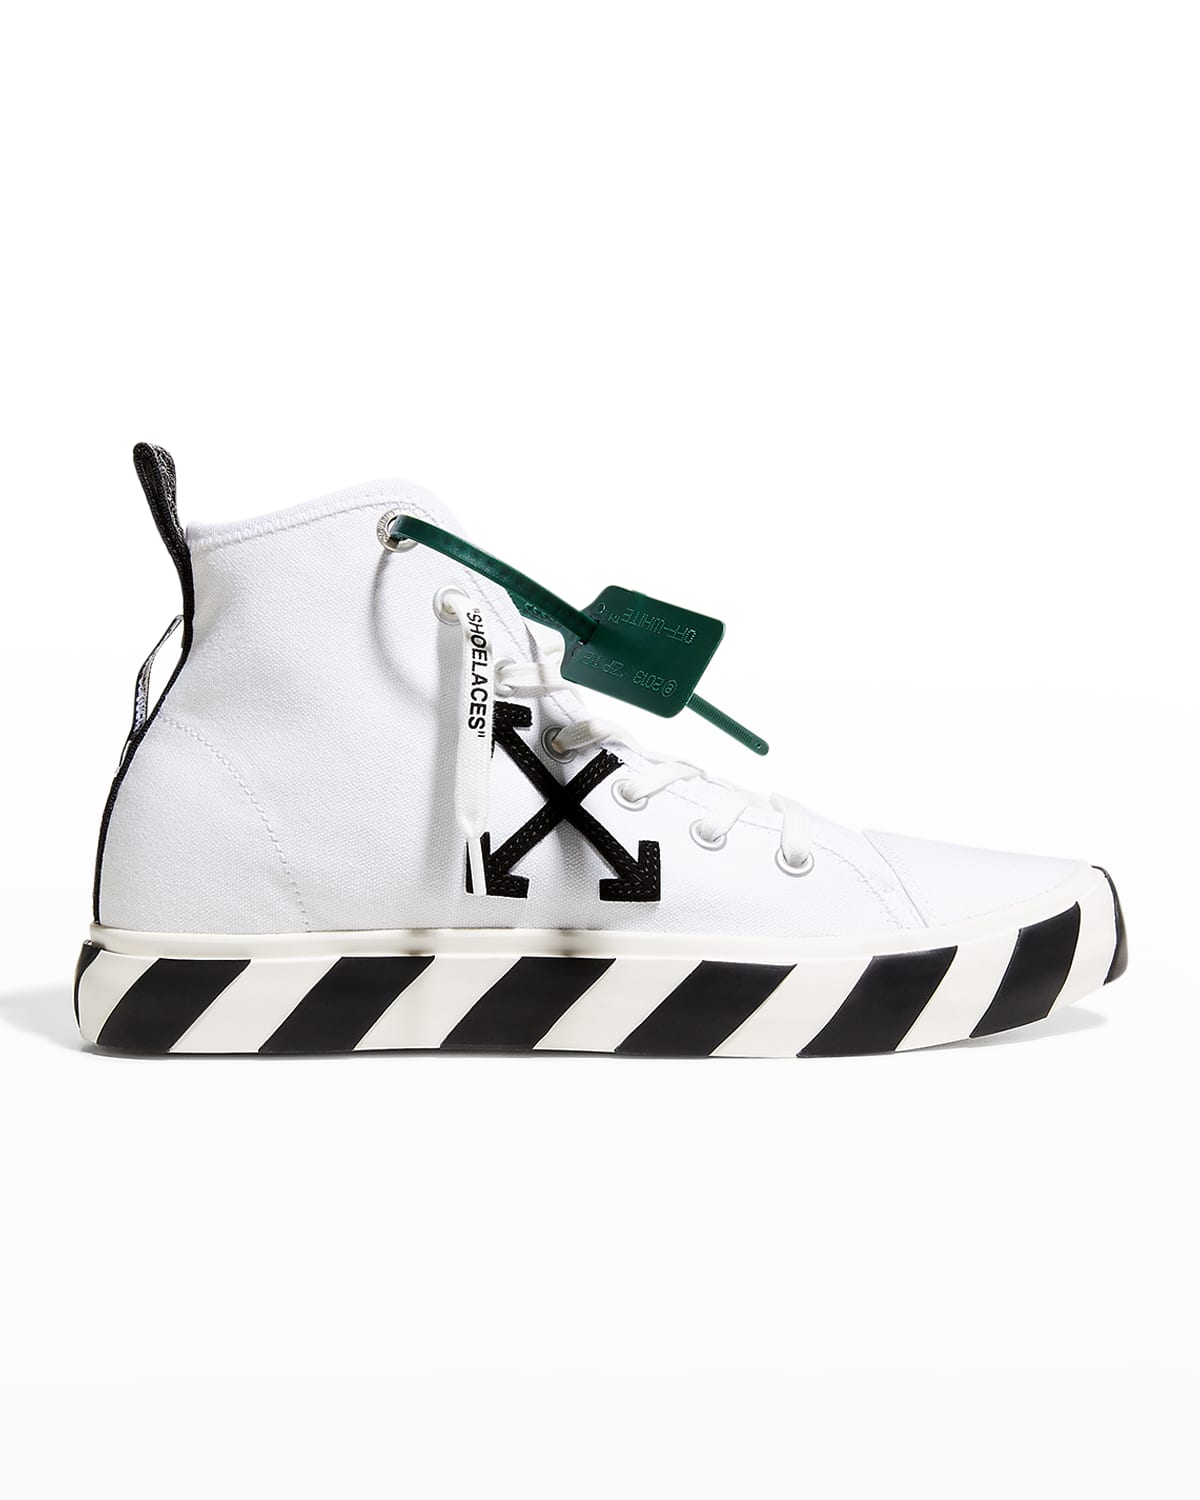 Off-White Men's Arrow Striped Canvas Mid-Top Sneakers | Neiman Marcus